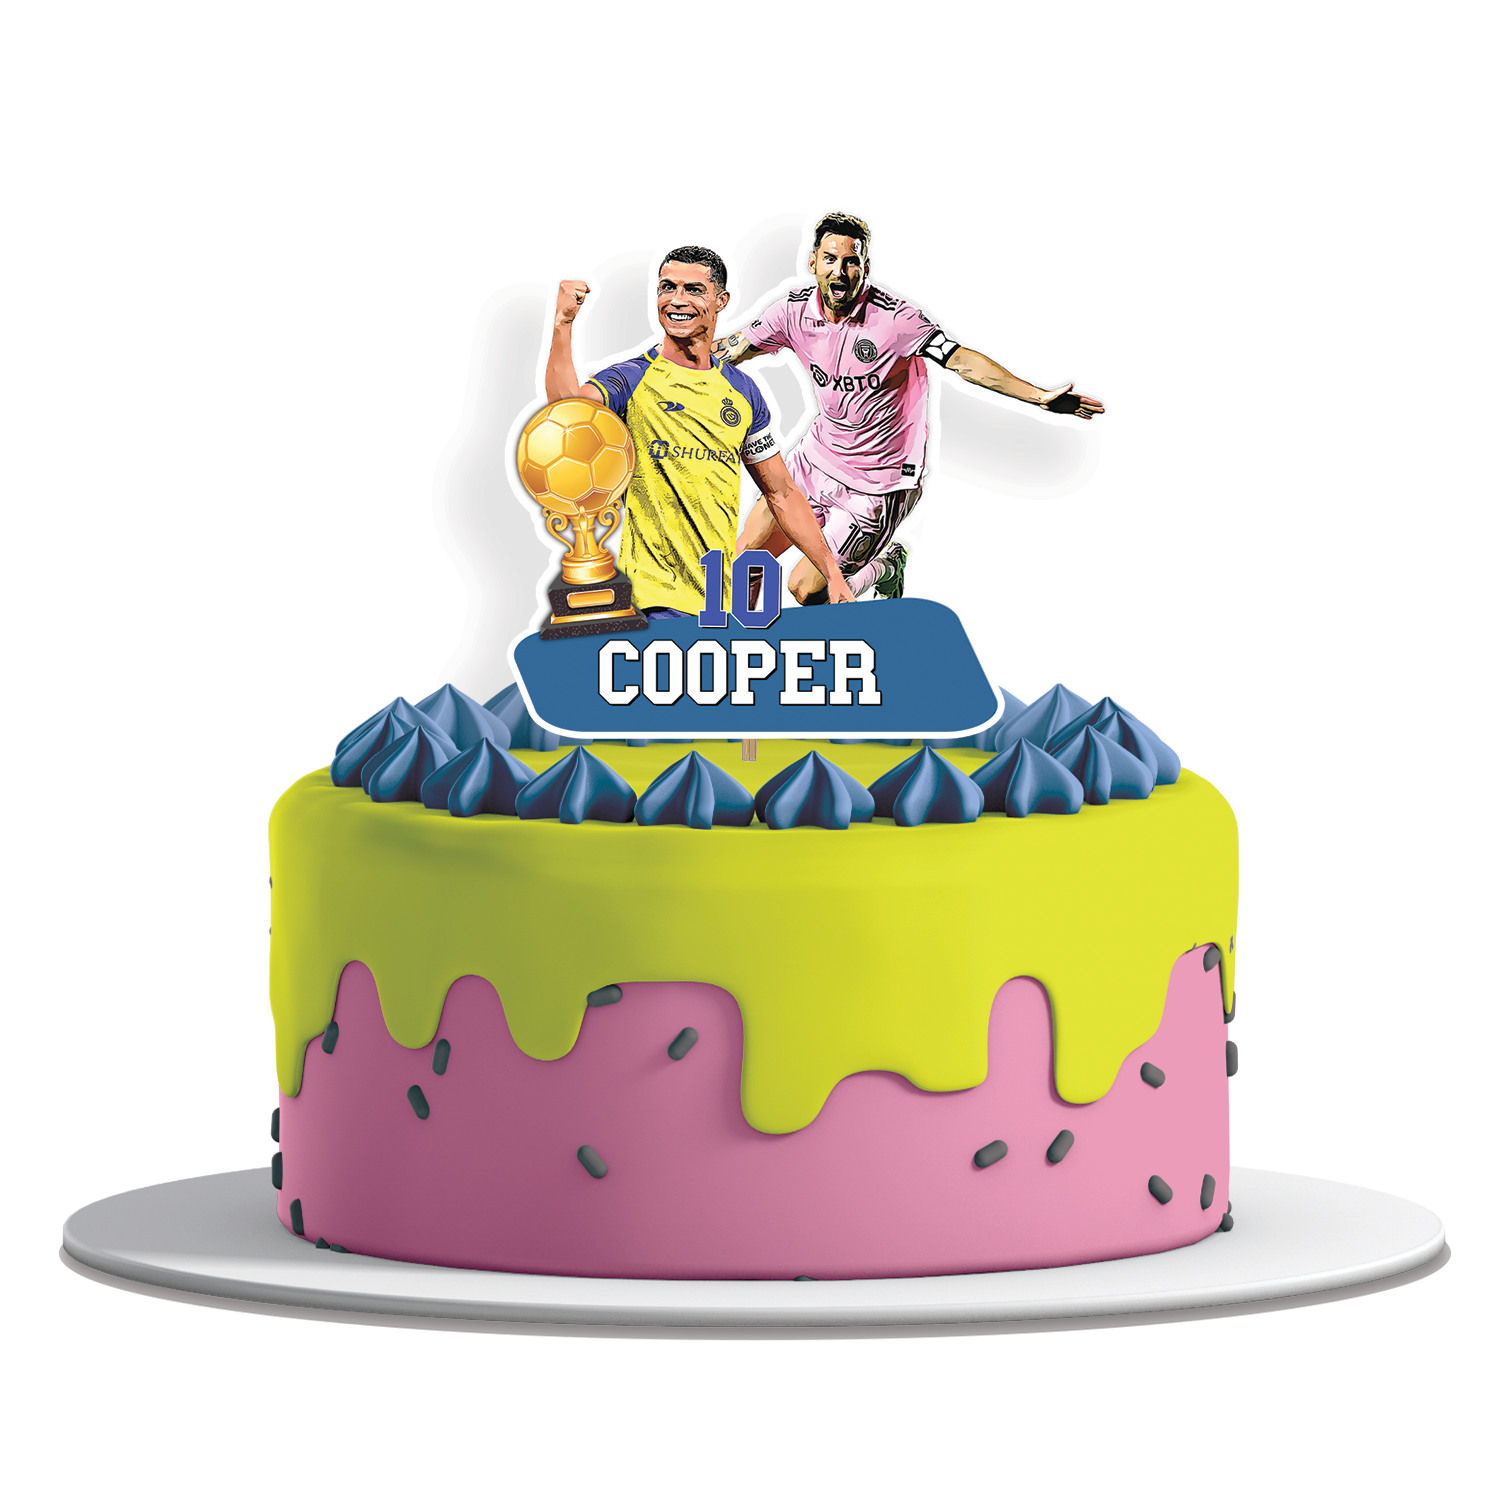 Personalized cake toppers featuring Messi & Ronaldo